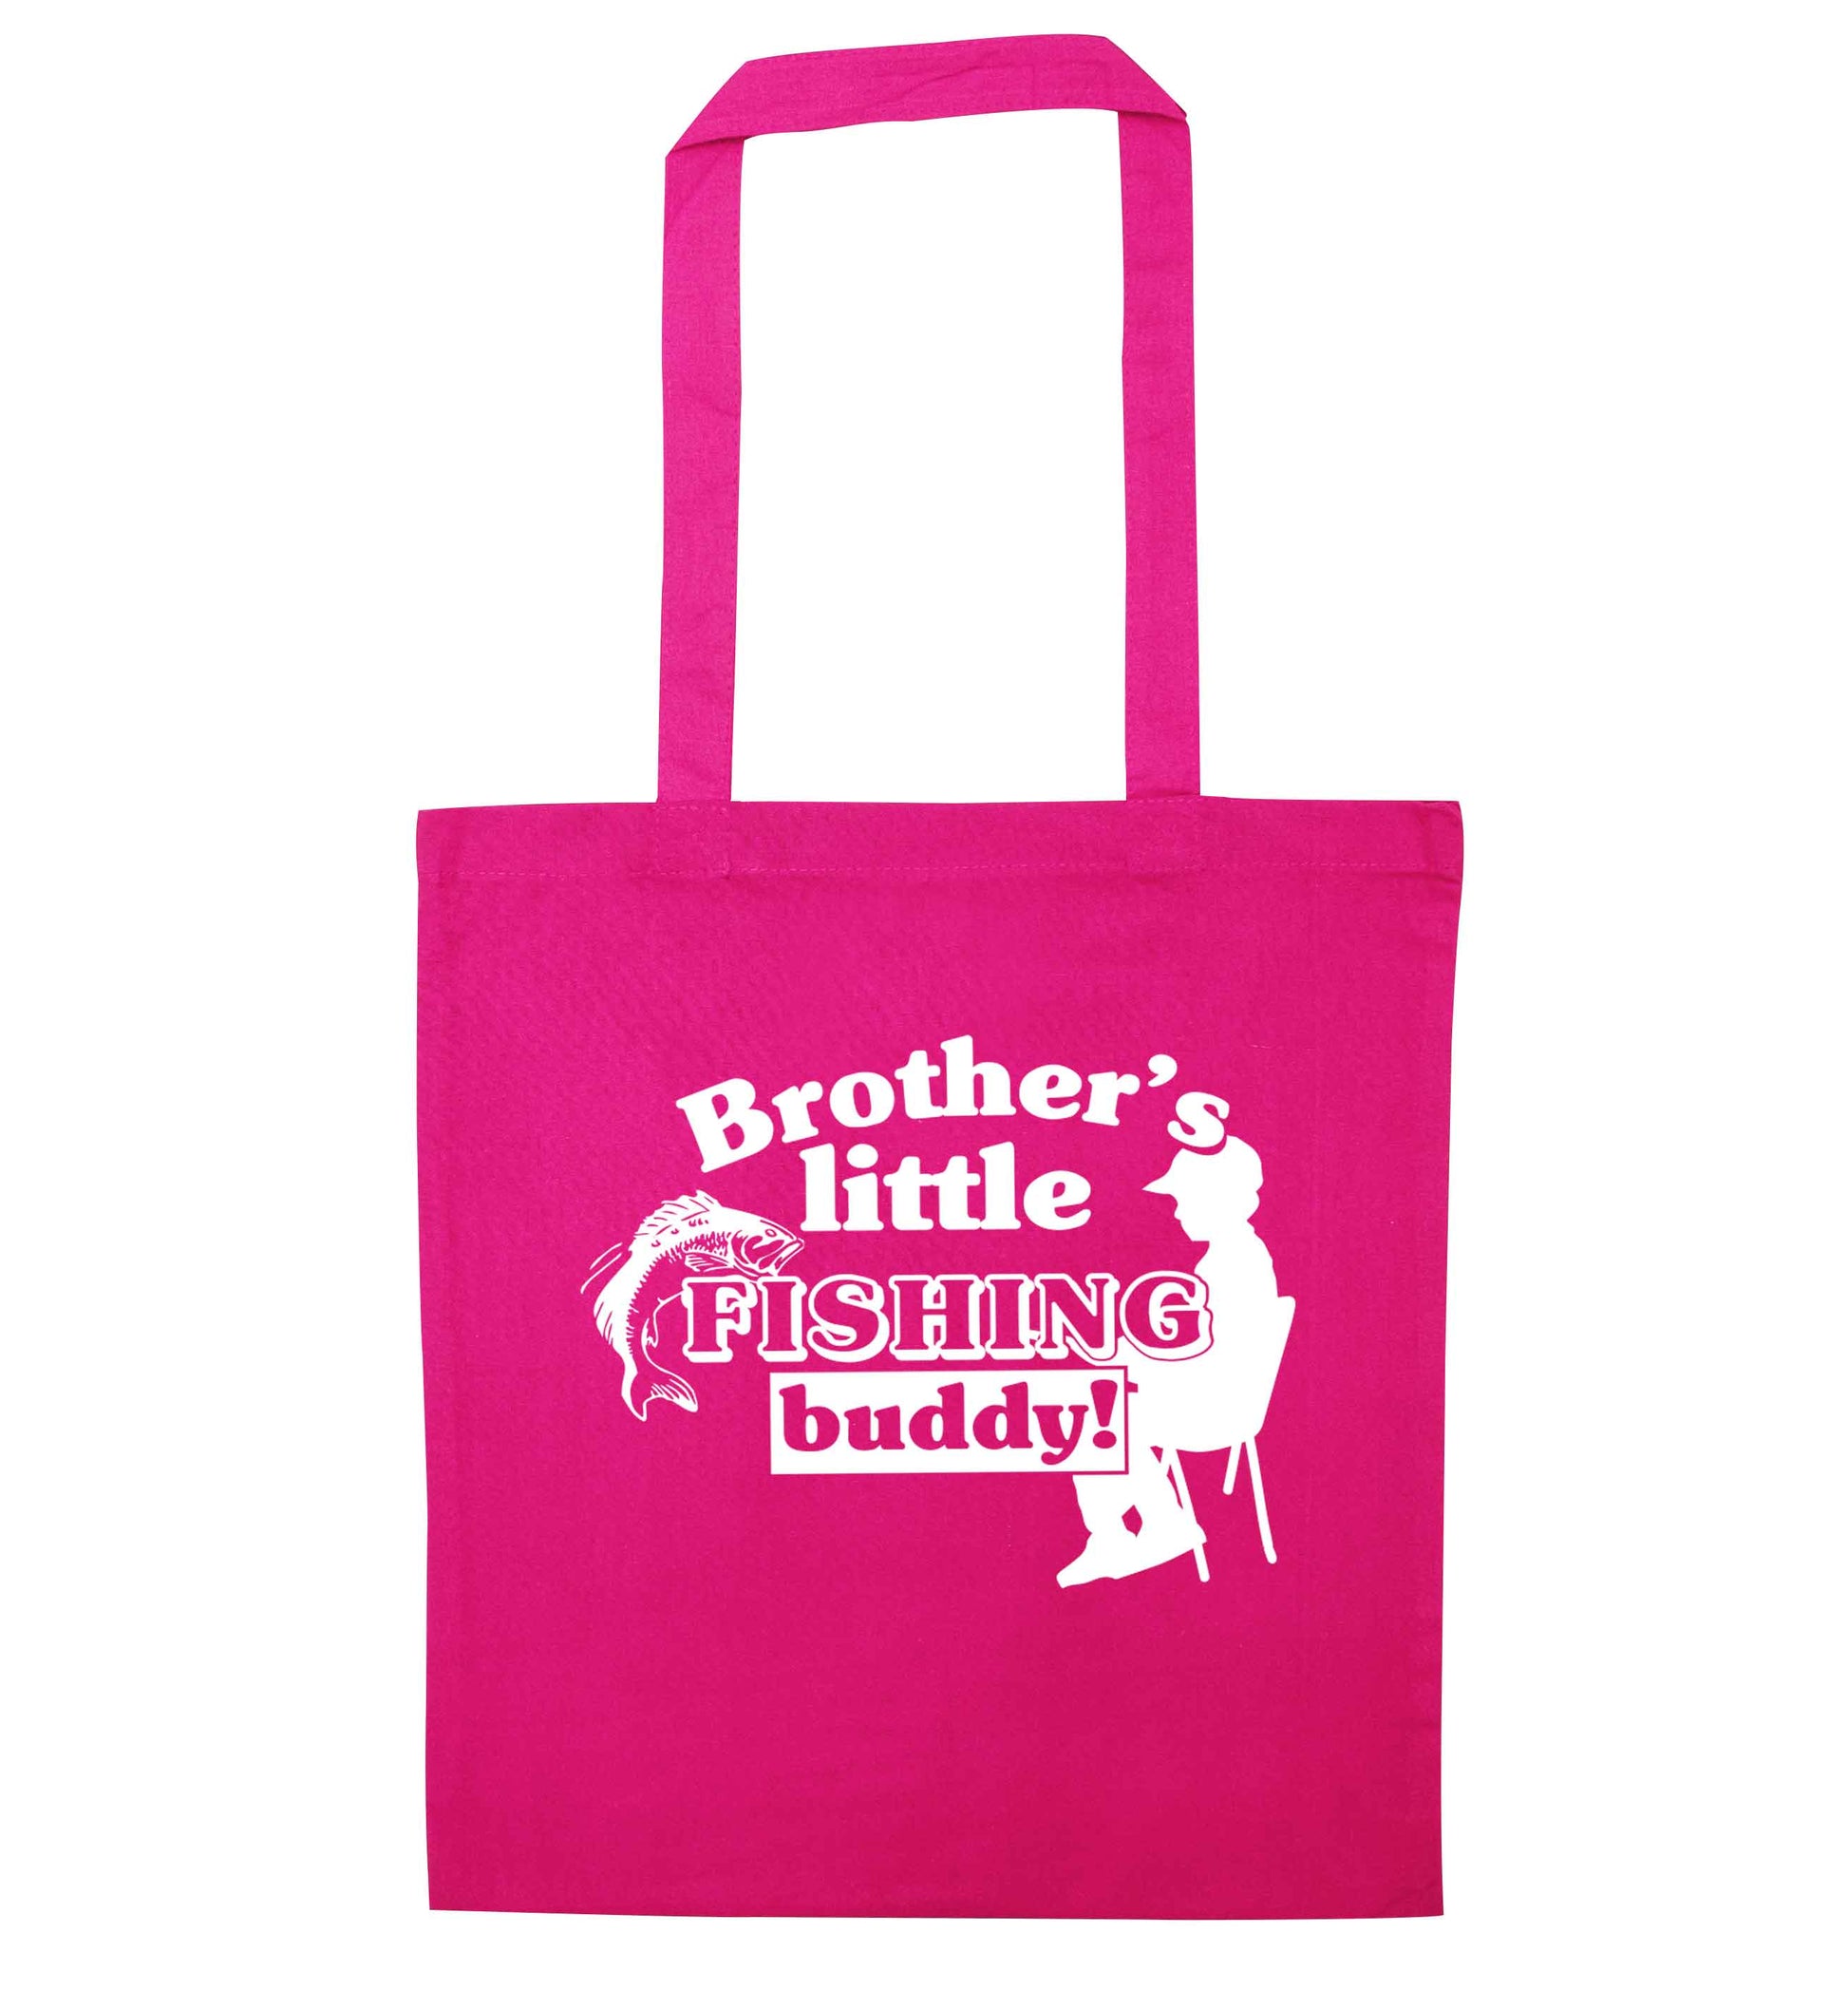 Brother's little fishing buddy pink tote bag